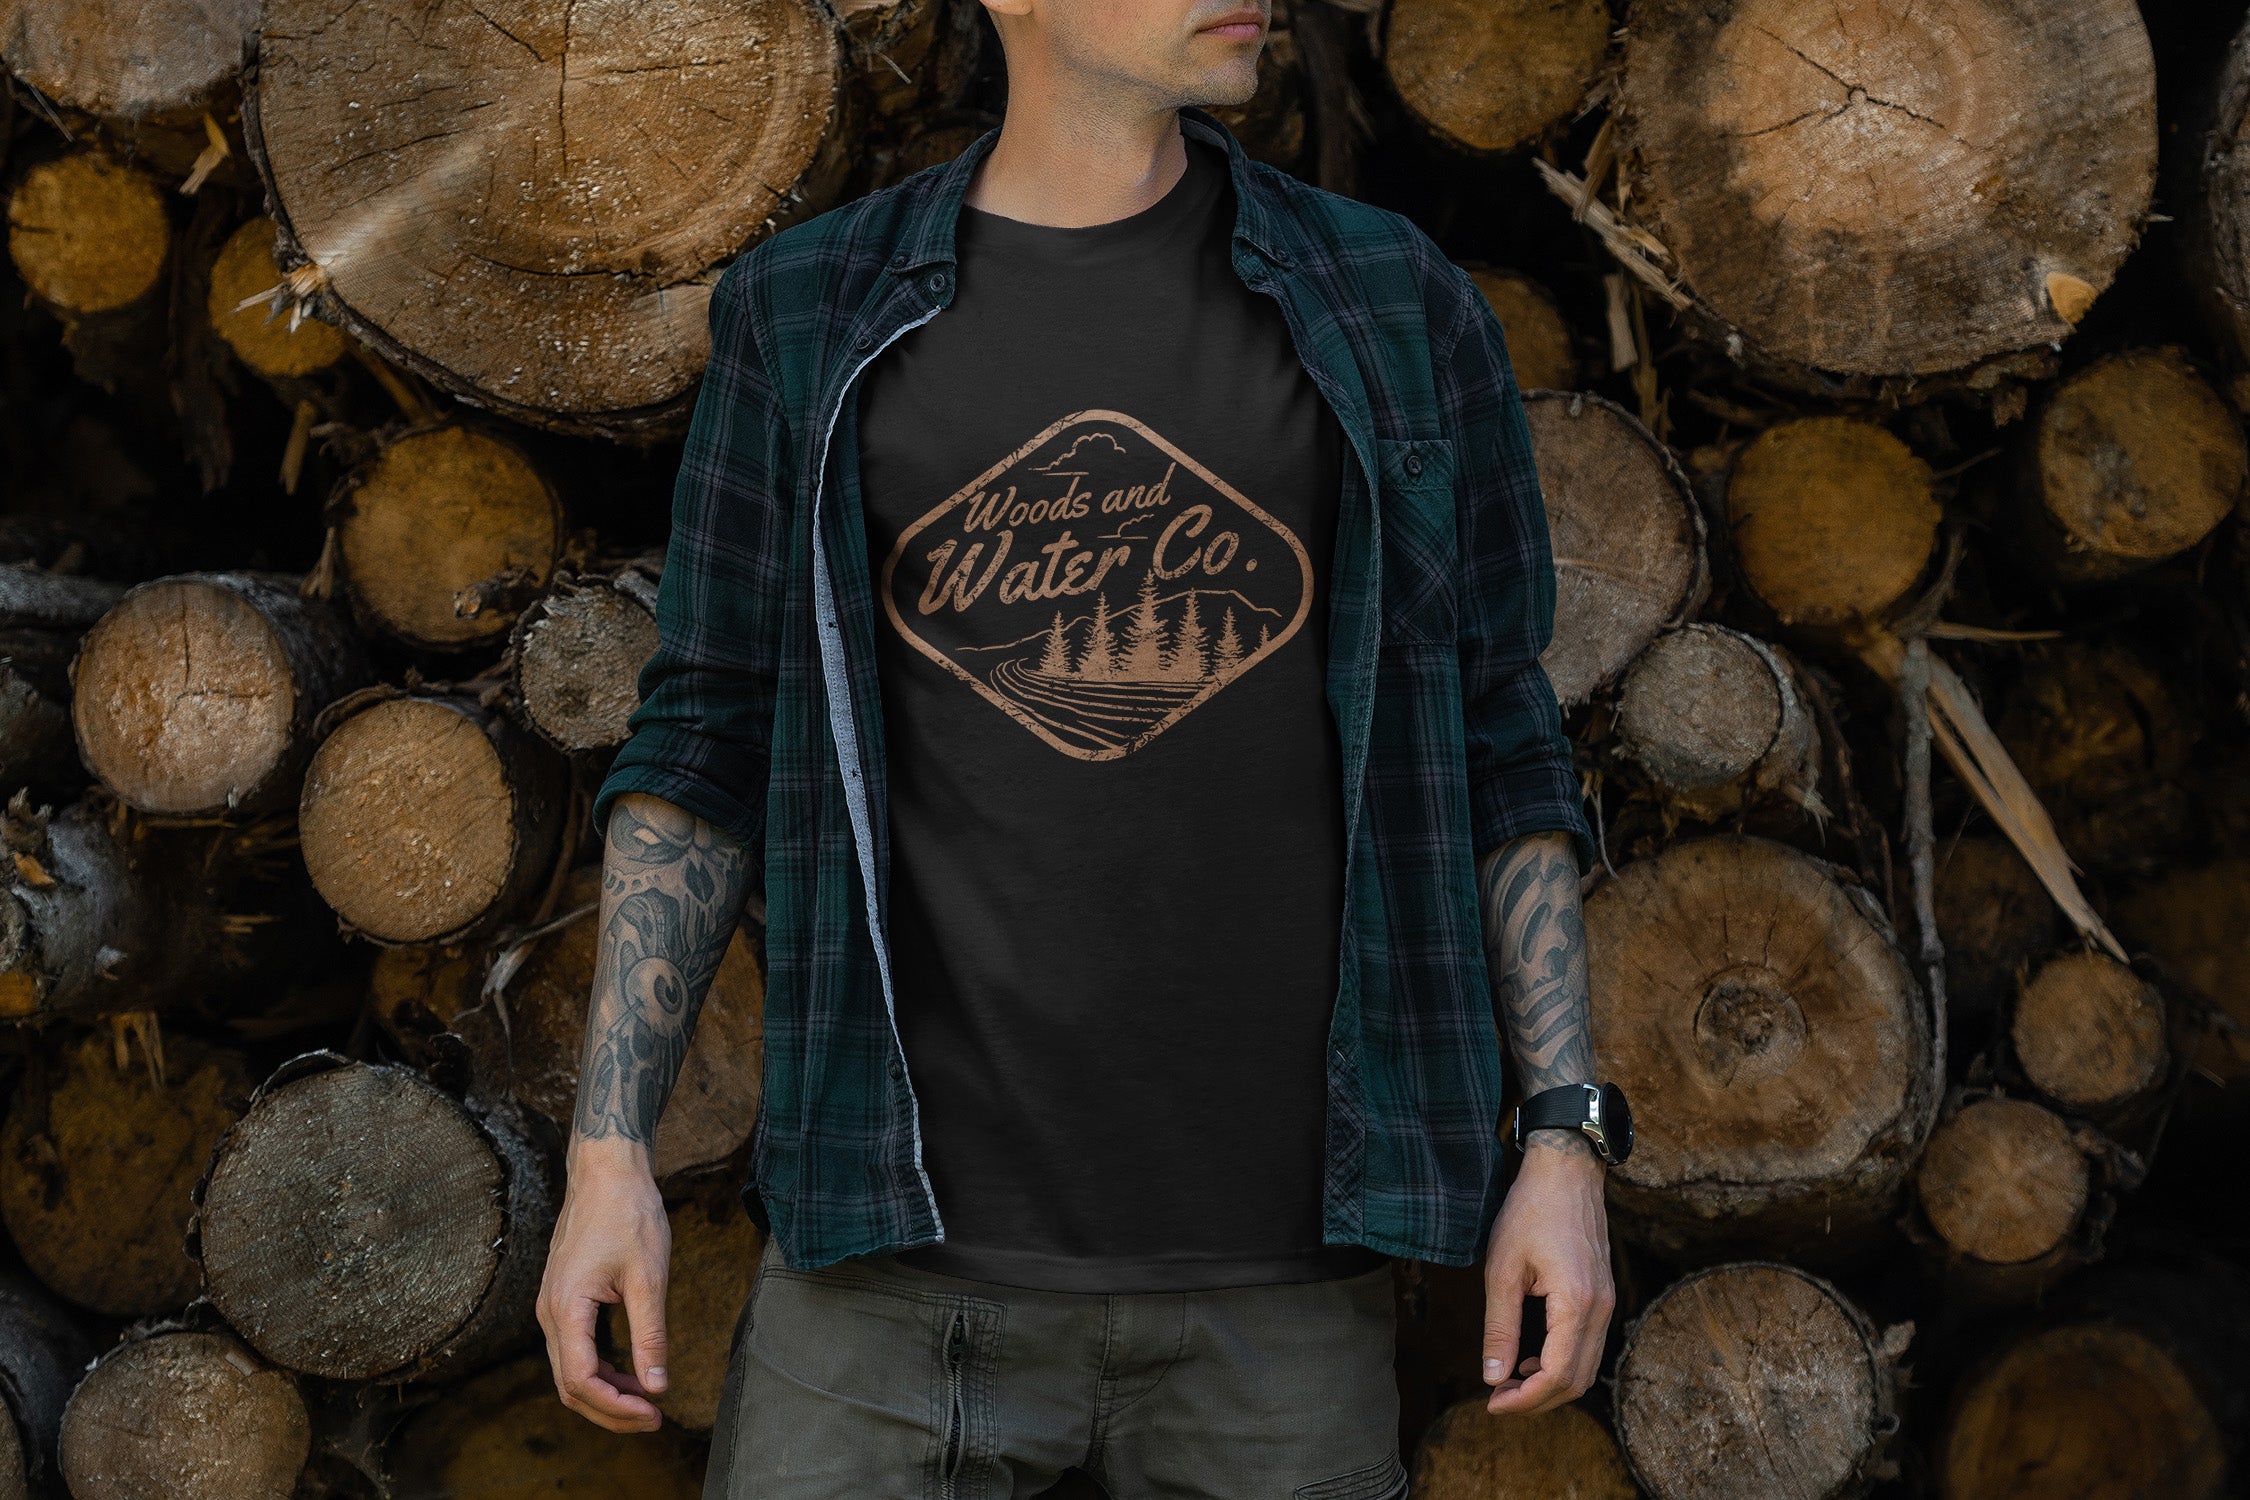 river bend woods and water co outdoor adventure tshirt